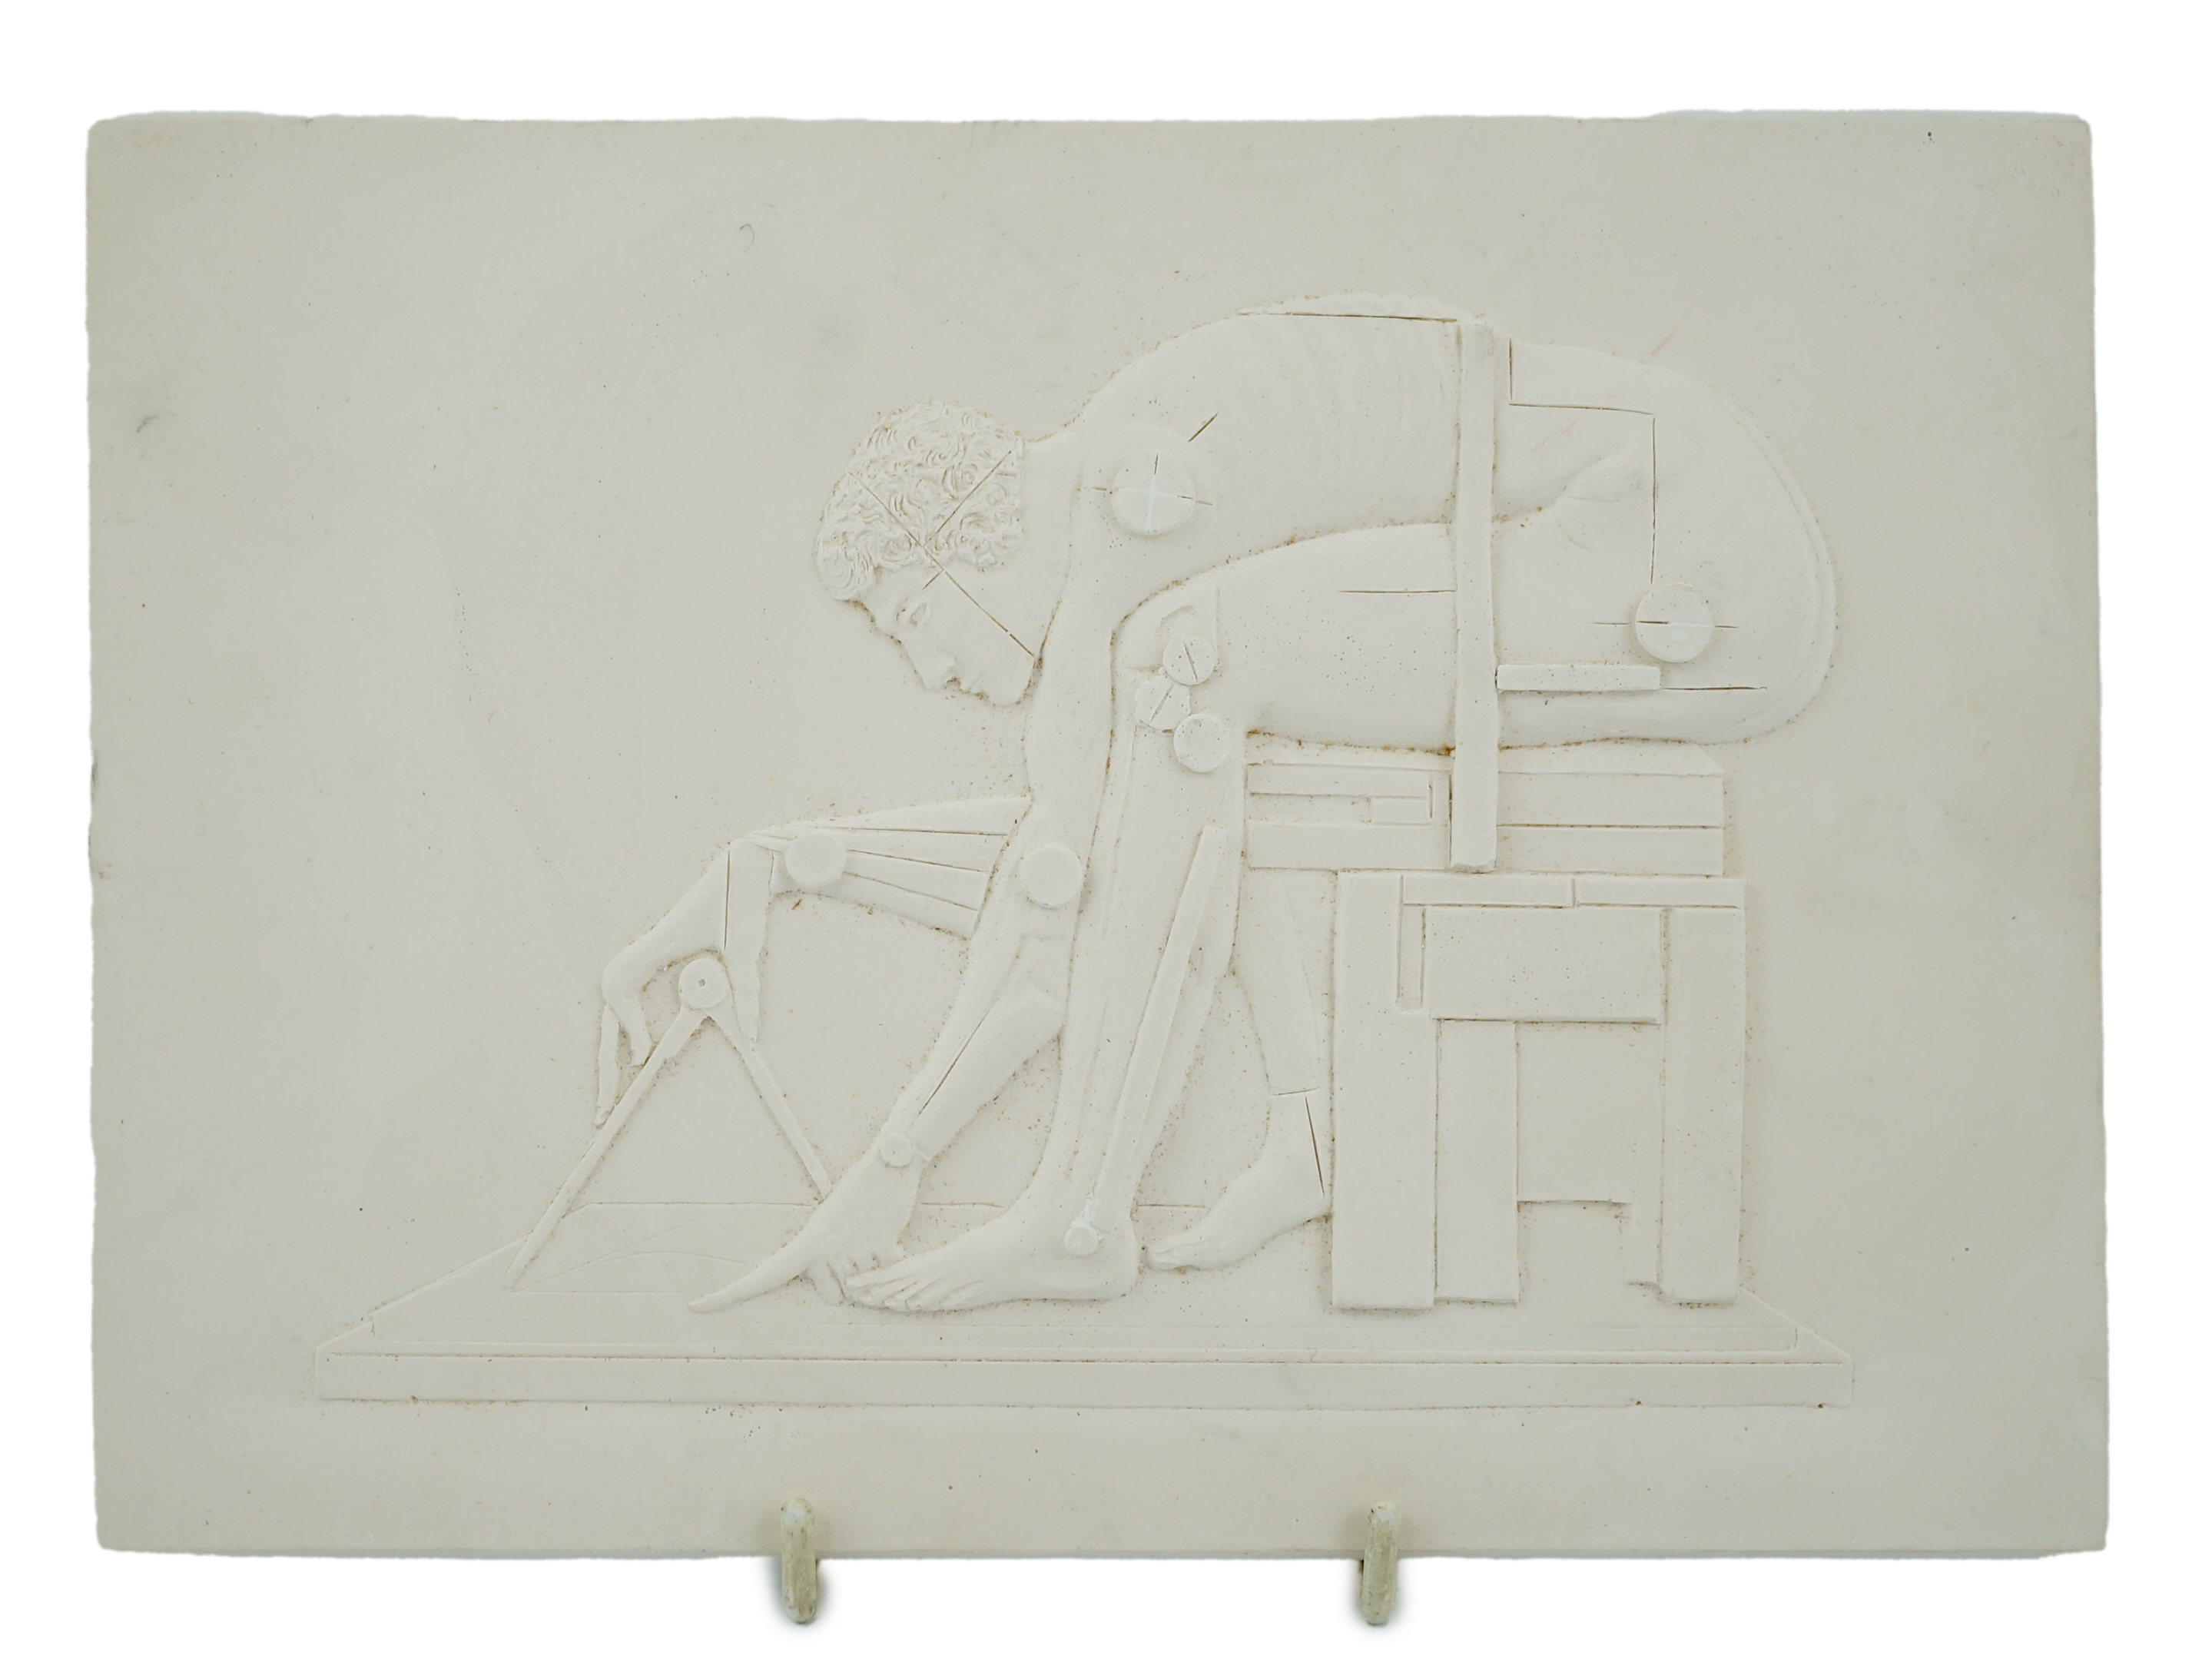 Sir Eduardo Paolozzi (British, 1924-2005), Newton (After Blake), 1994 (Study for the British Library), plaster relief, 15 x 21cm